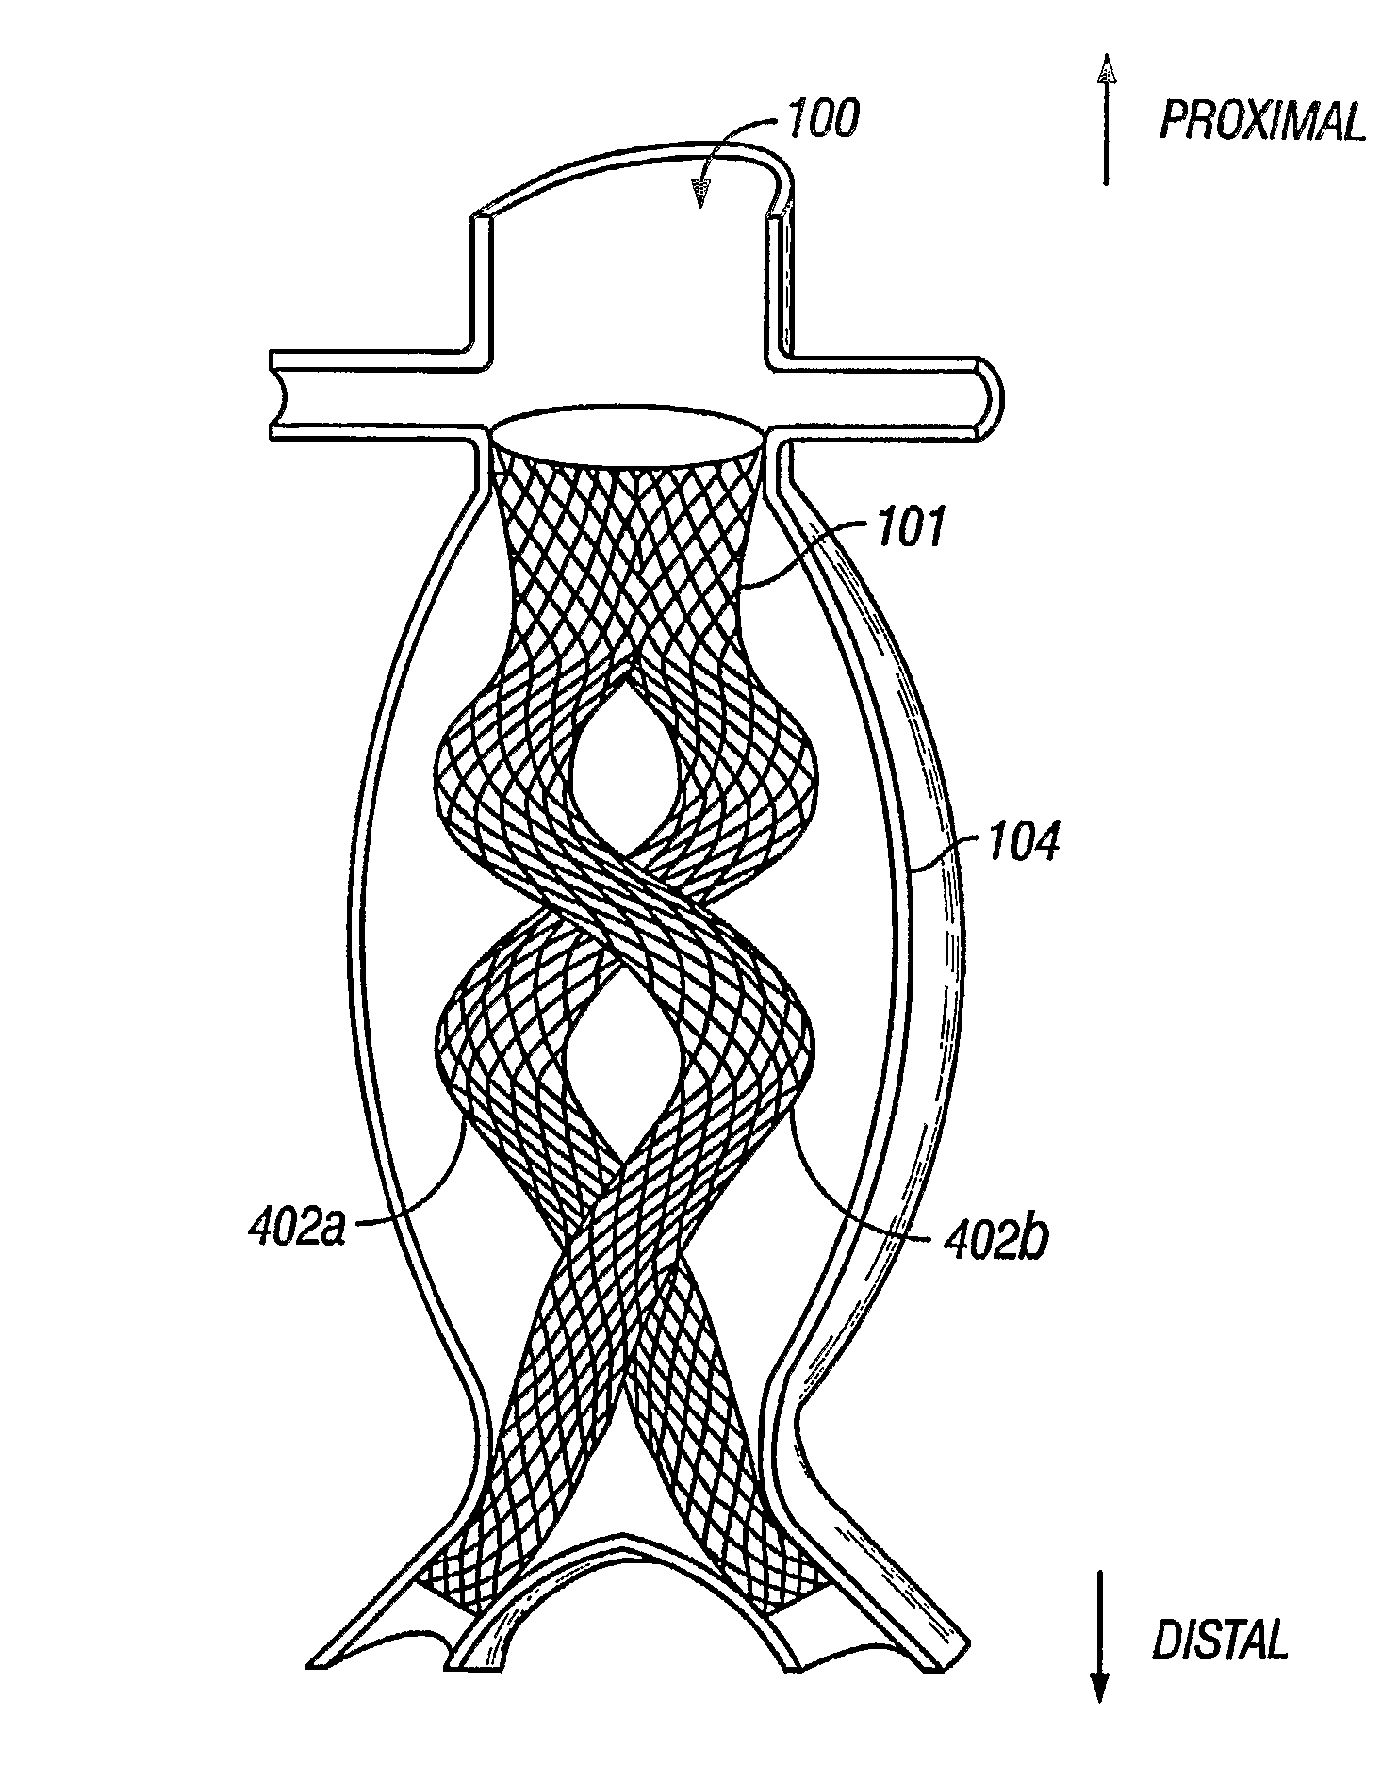 Devices and methods for treatment of abdominal aortic aneurysm